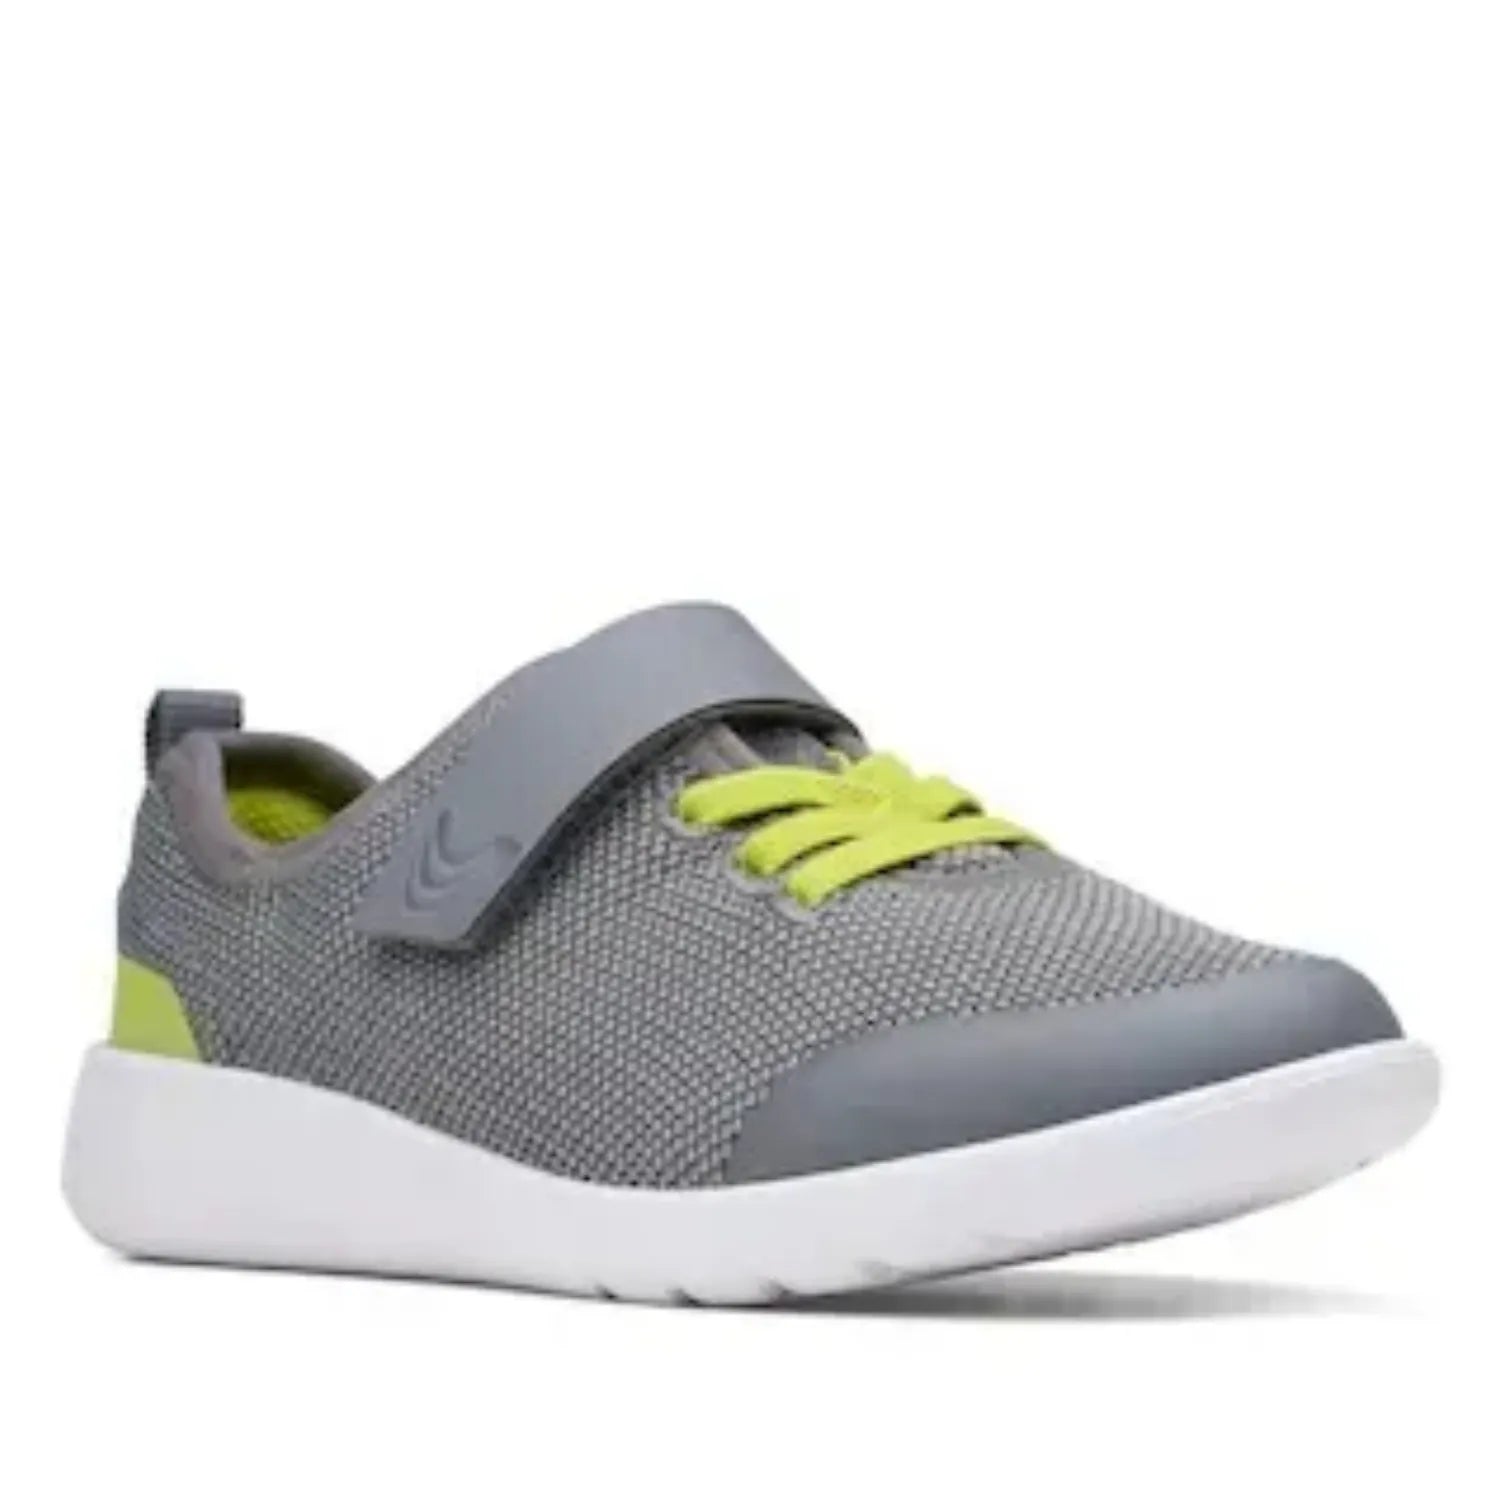 Clarks scape track youth Athletic Shoes - Ready for Action